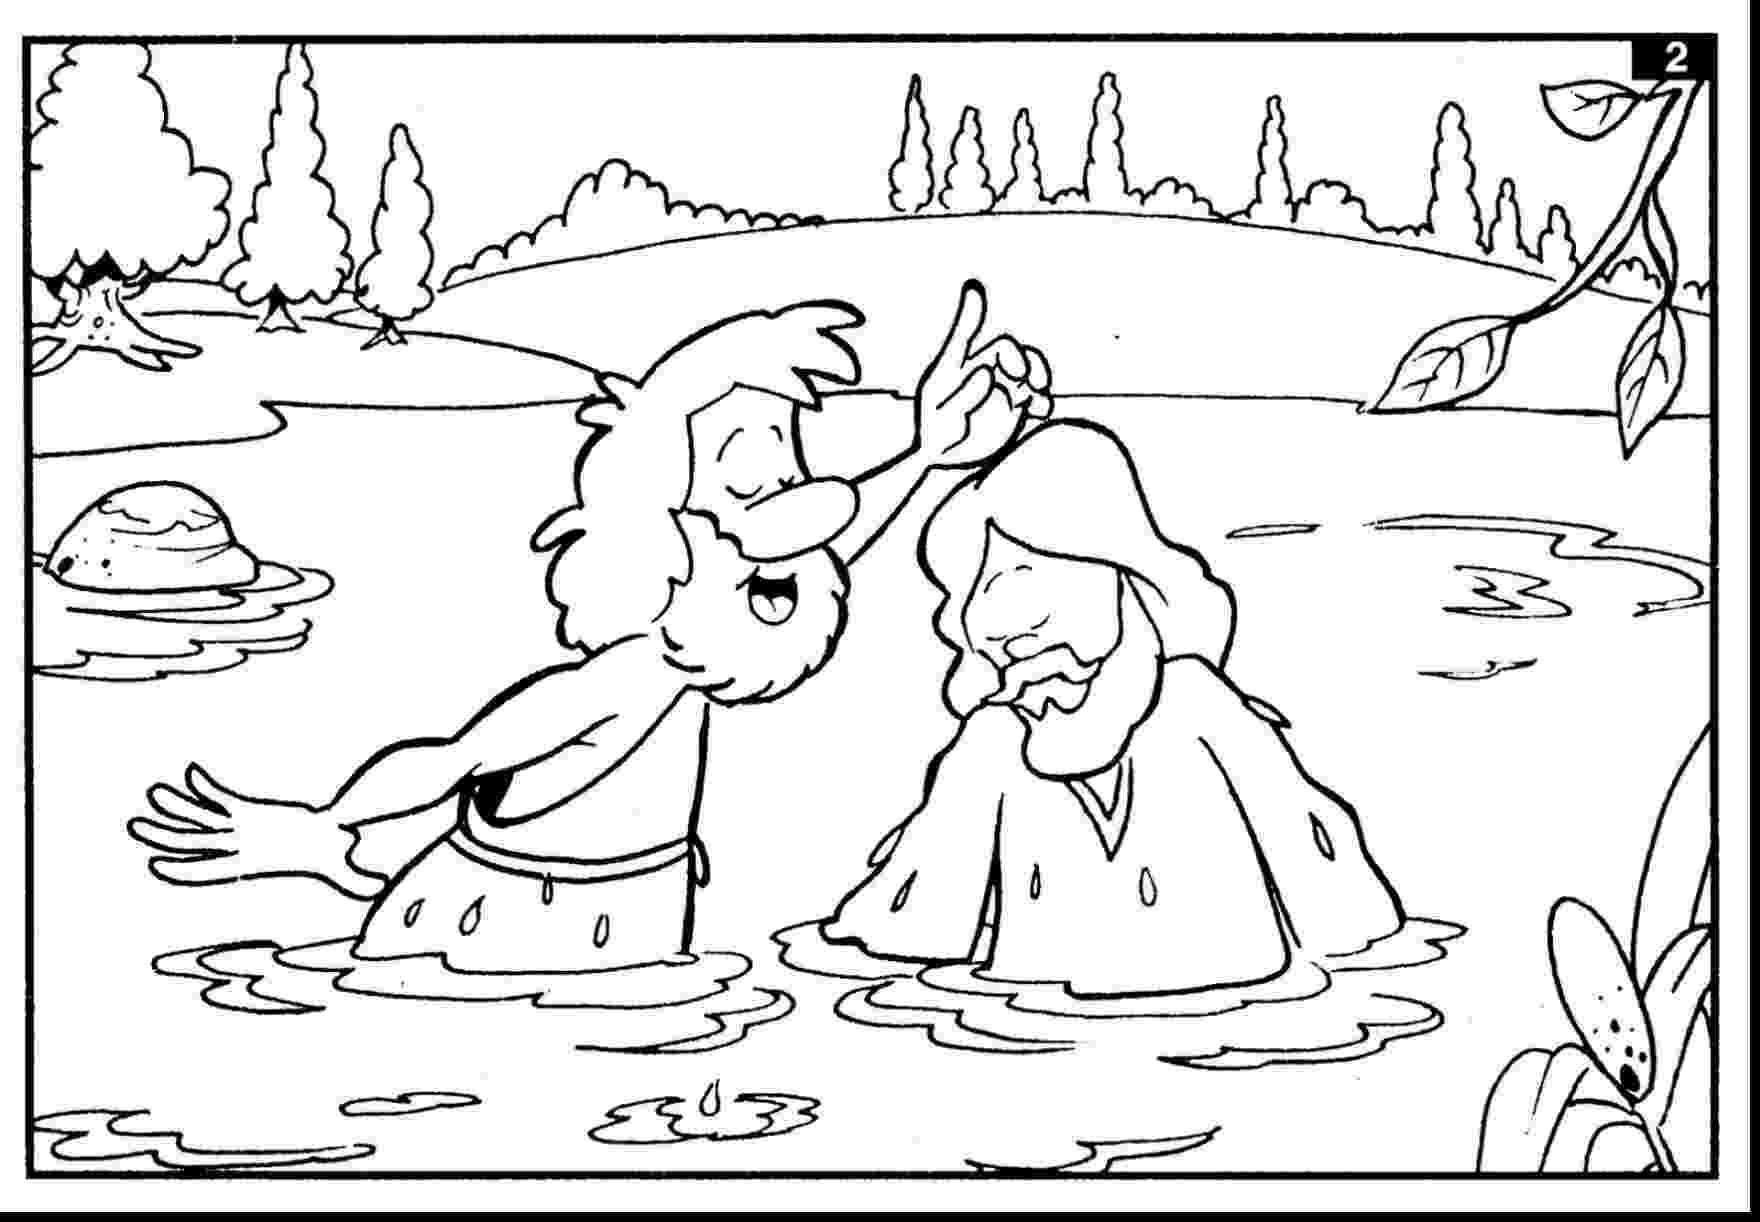 colouring picture jesus baptism superb john the baptist coloring pages for kids with baptism picture colouring jesus 